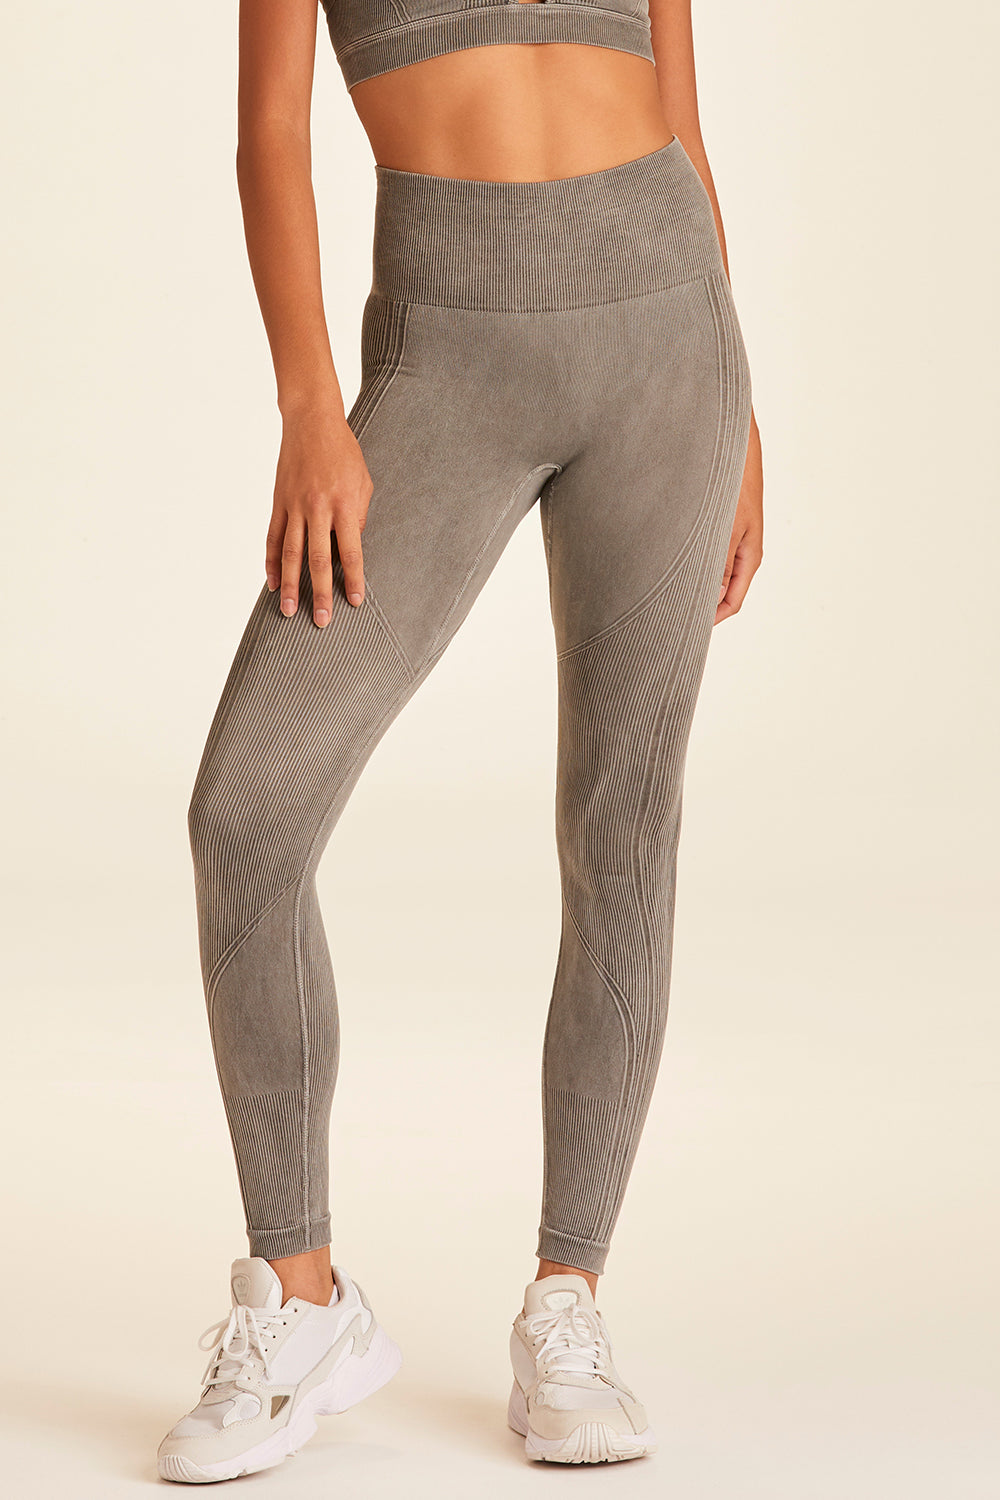 Image of Barre Seamless Tight